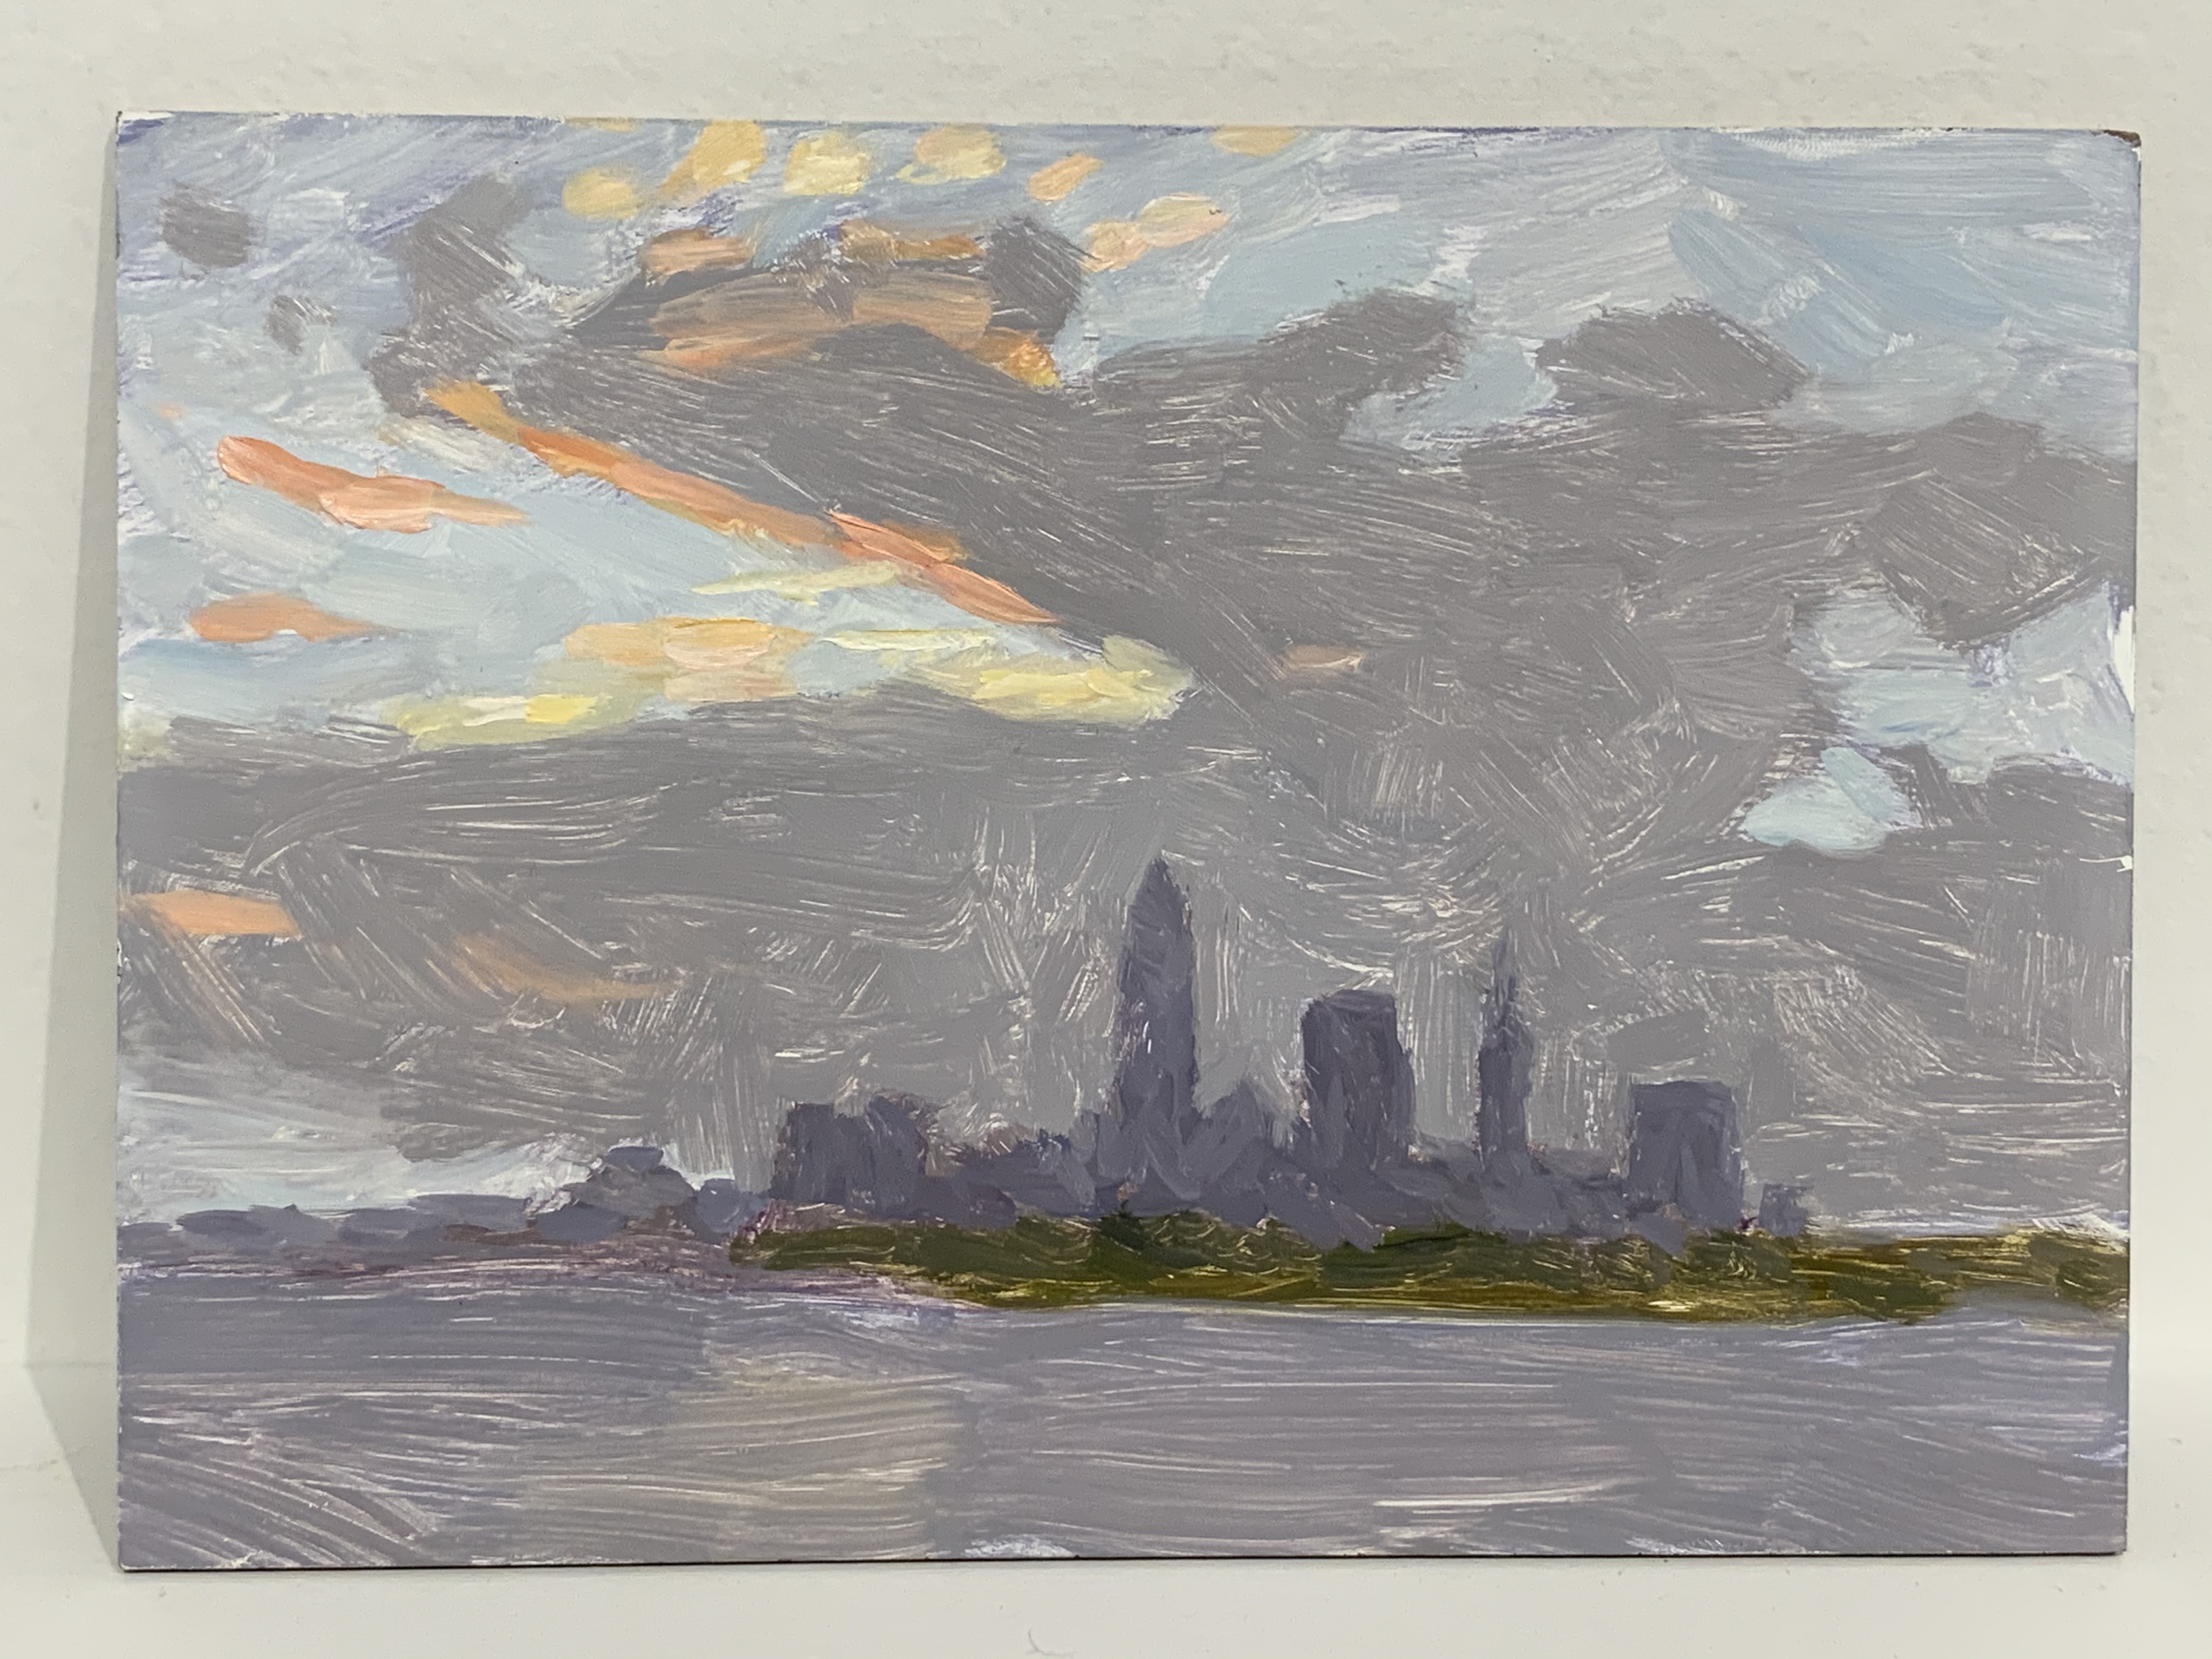 Adrian Eisenhower painted Cleveland's skyline without creating an instant cliche.